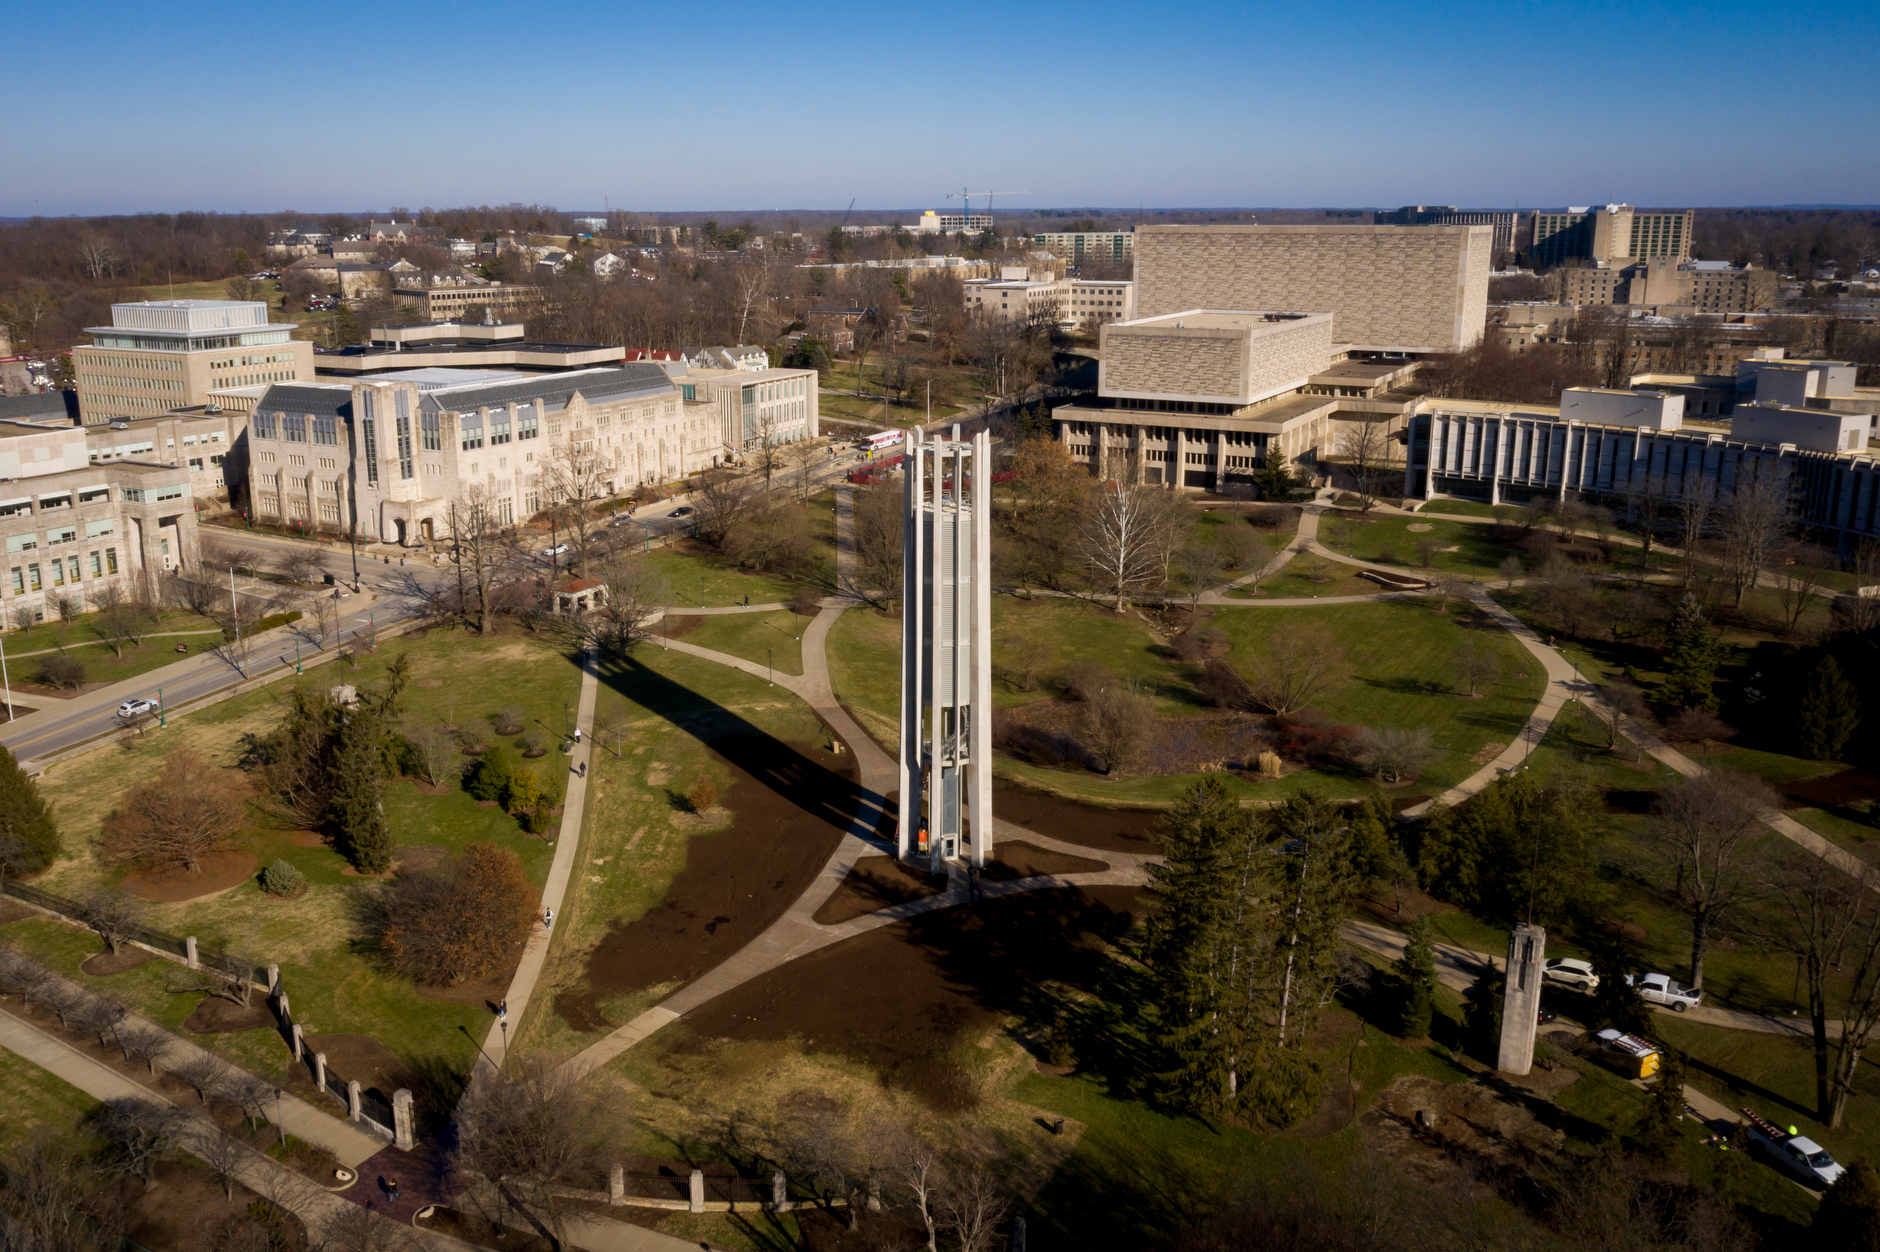 The Metz Bicentennial Grand Carillon stands in the Cox Arboretum at IU Bloomington on Thursday, Jan. 16, 2020. (James Brosher/Indiana University)